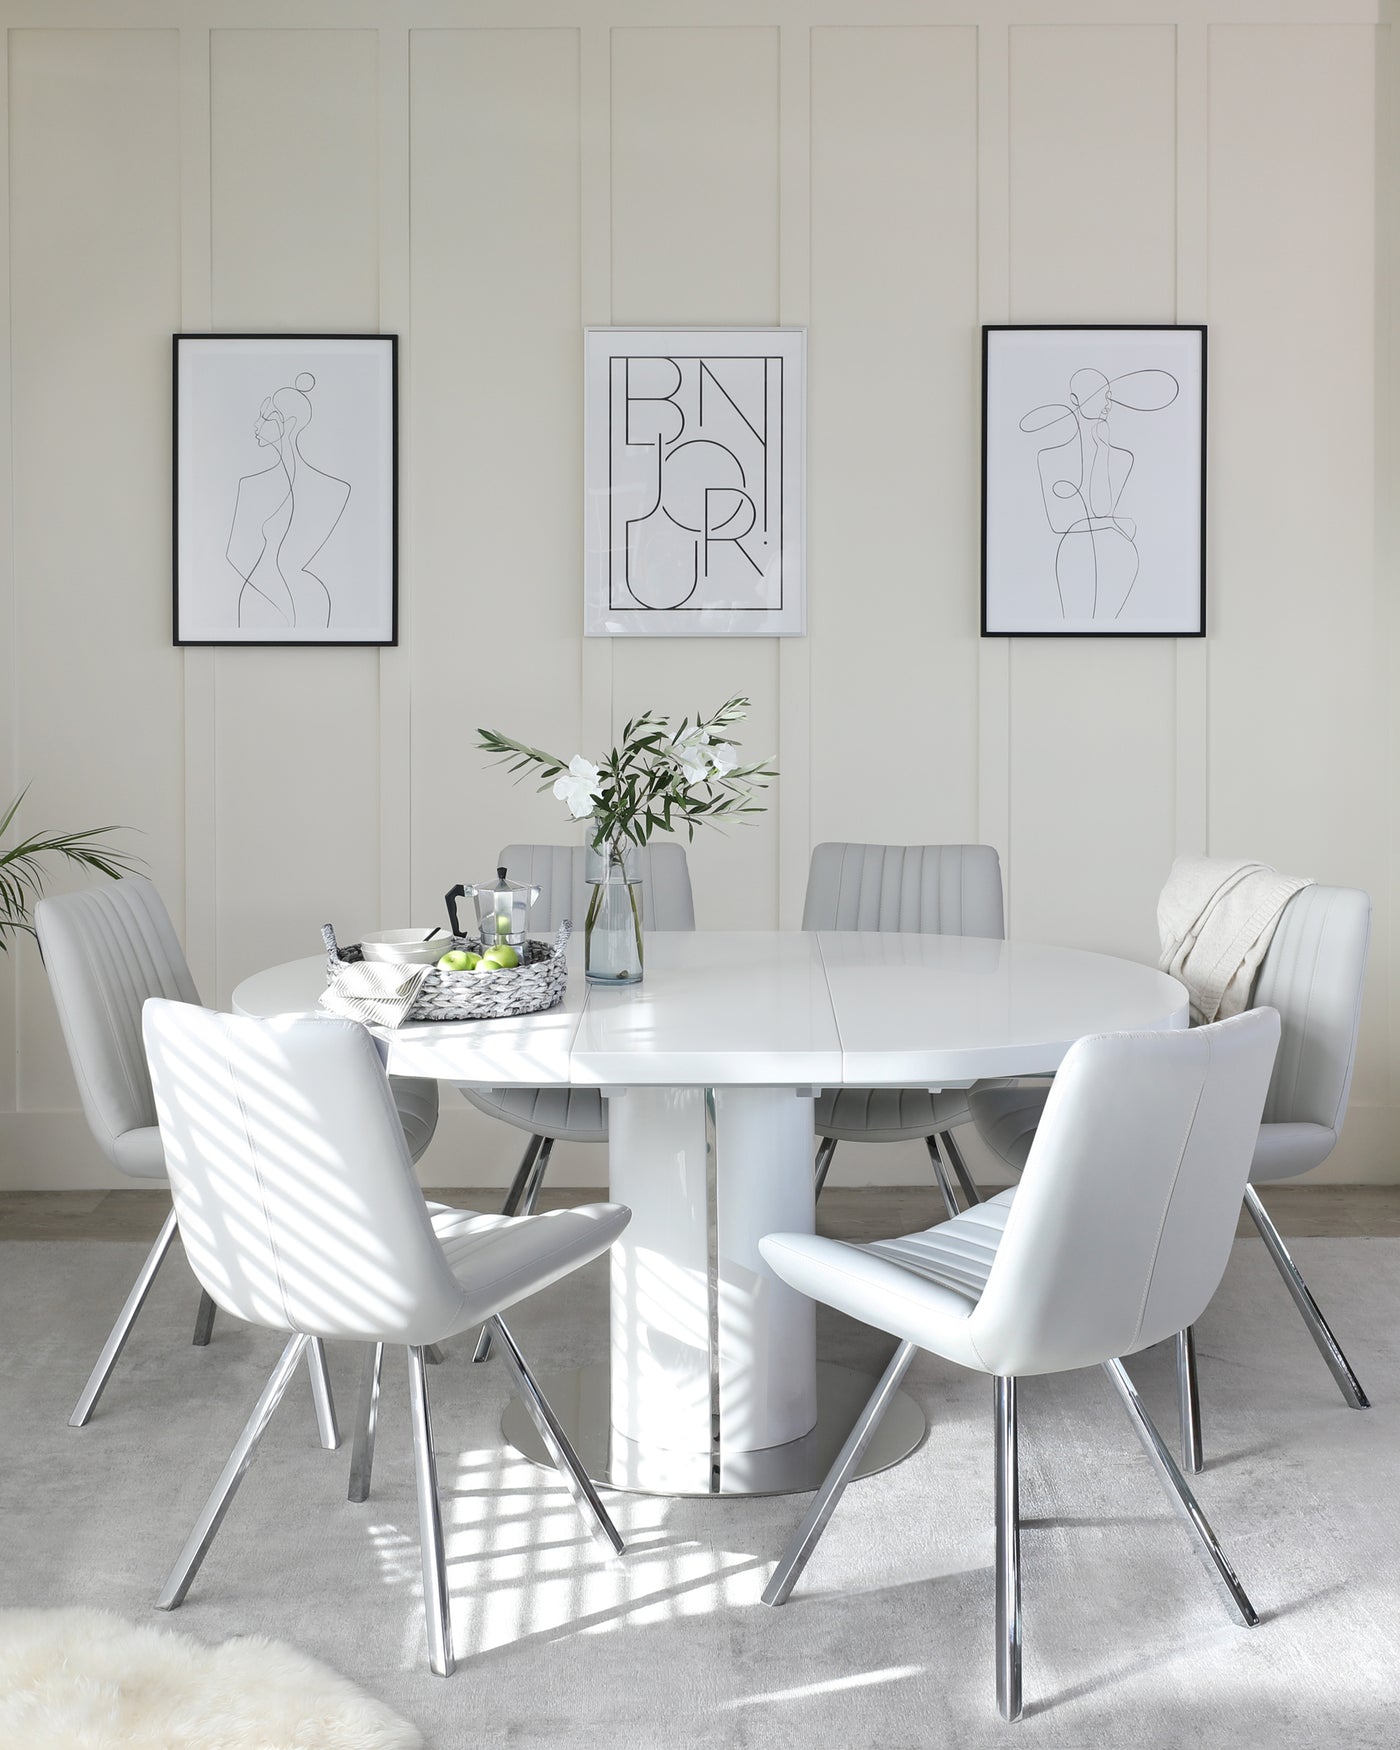 Modern dining room featuring a sleek, round white table with a glossy finish and a cylindrical base, surrounded by six contemporary light grey upholstered chairs with stylish chrome legs. The chairs display a horizontal channel stitch detail. A plush white area rug underlies the set, enhancing the clean, minimalist aesthetic.